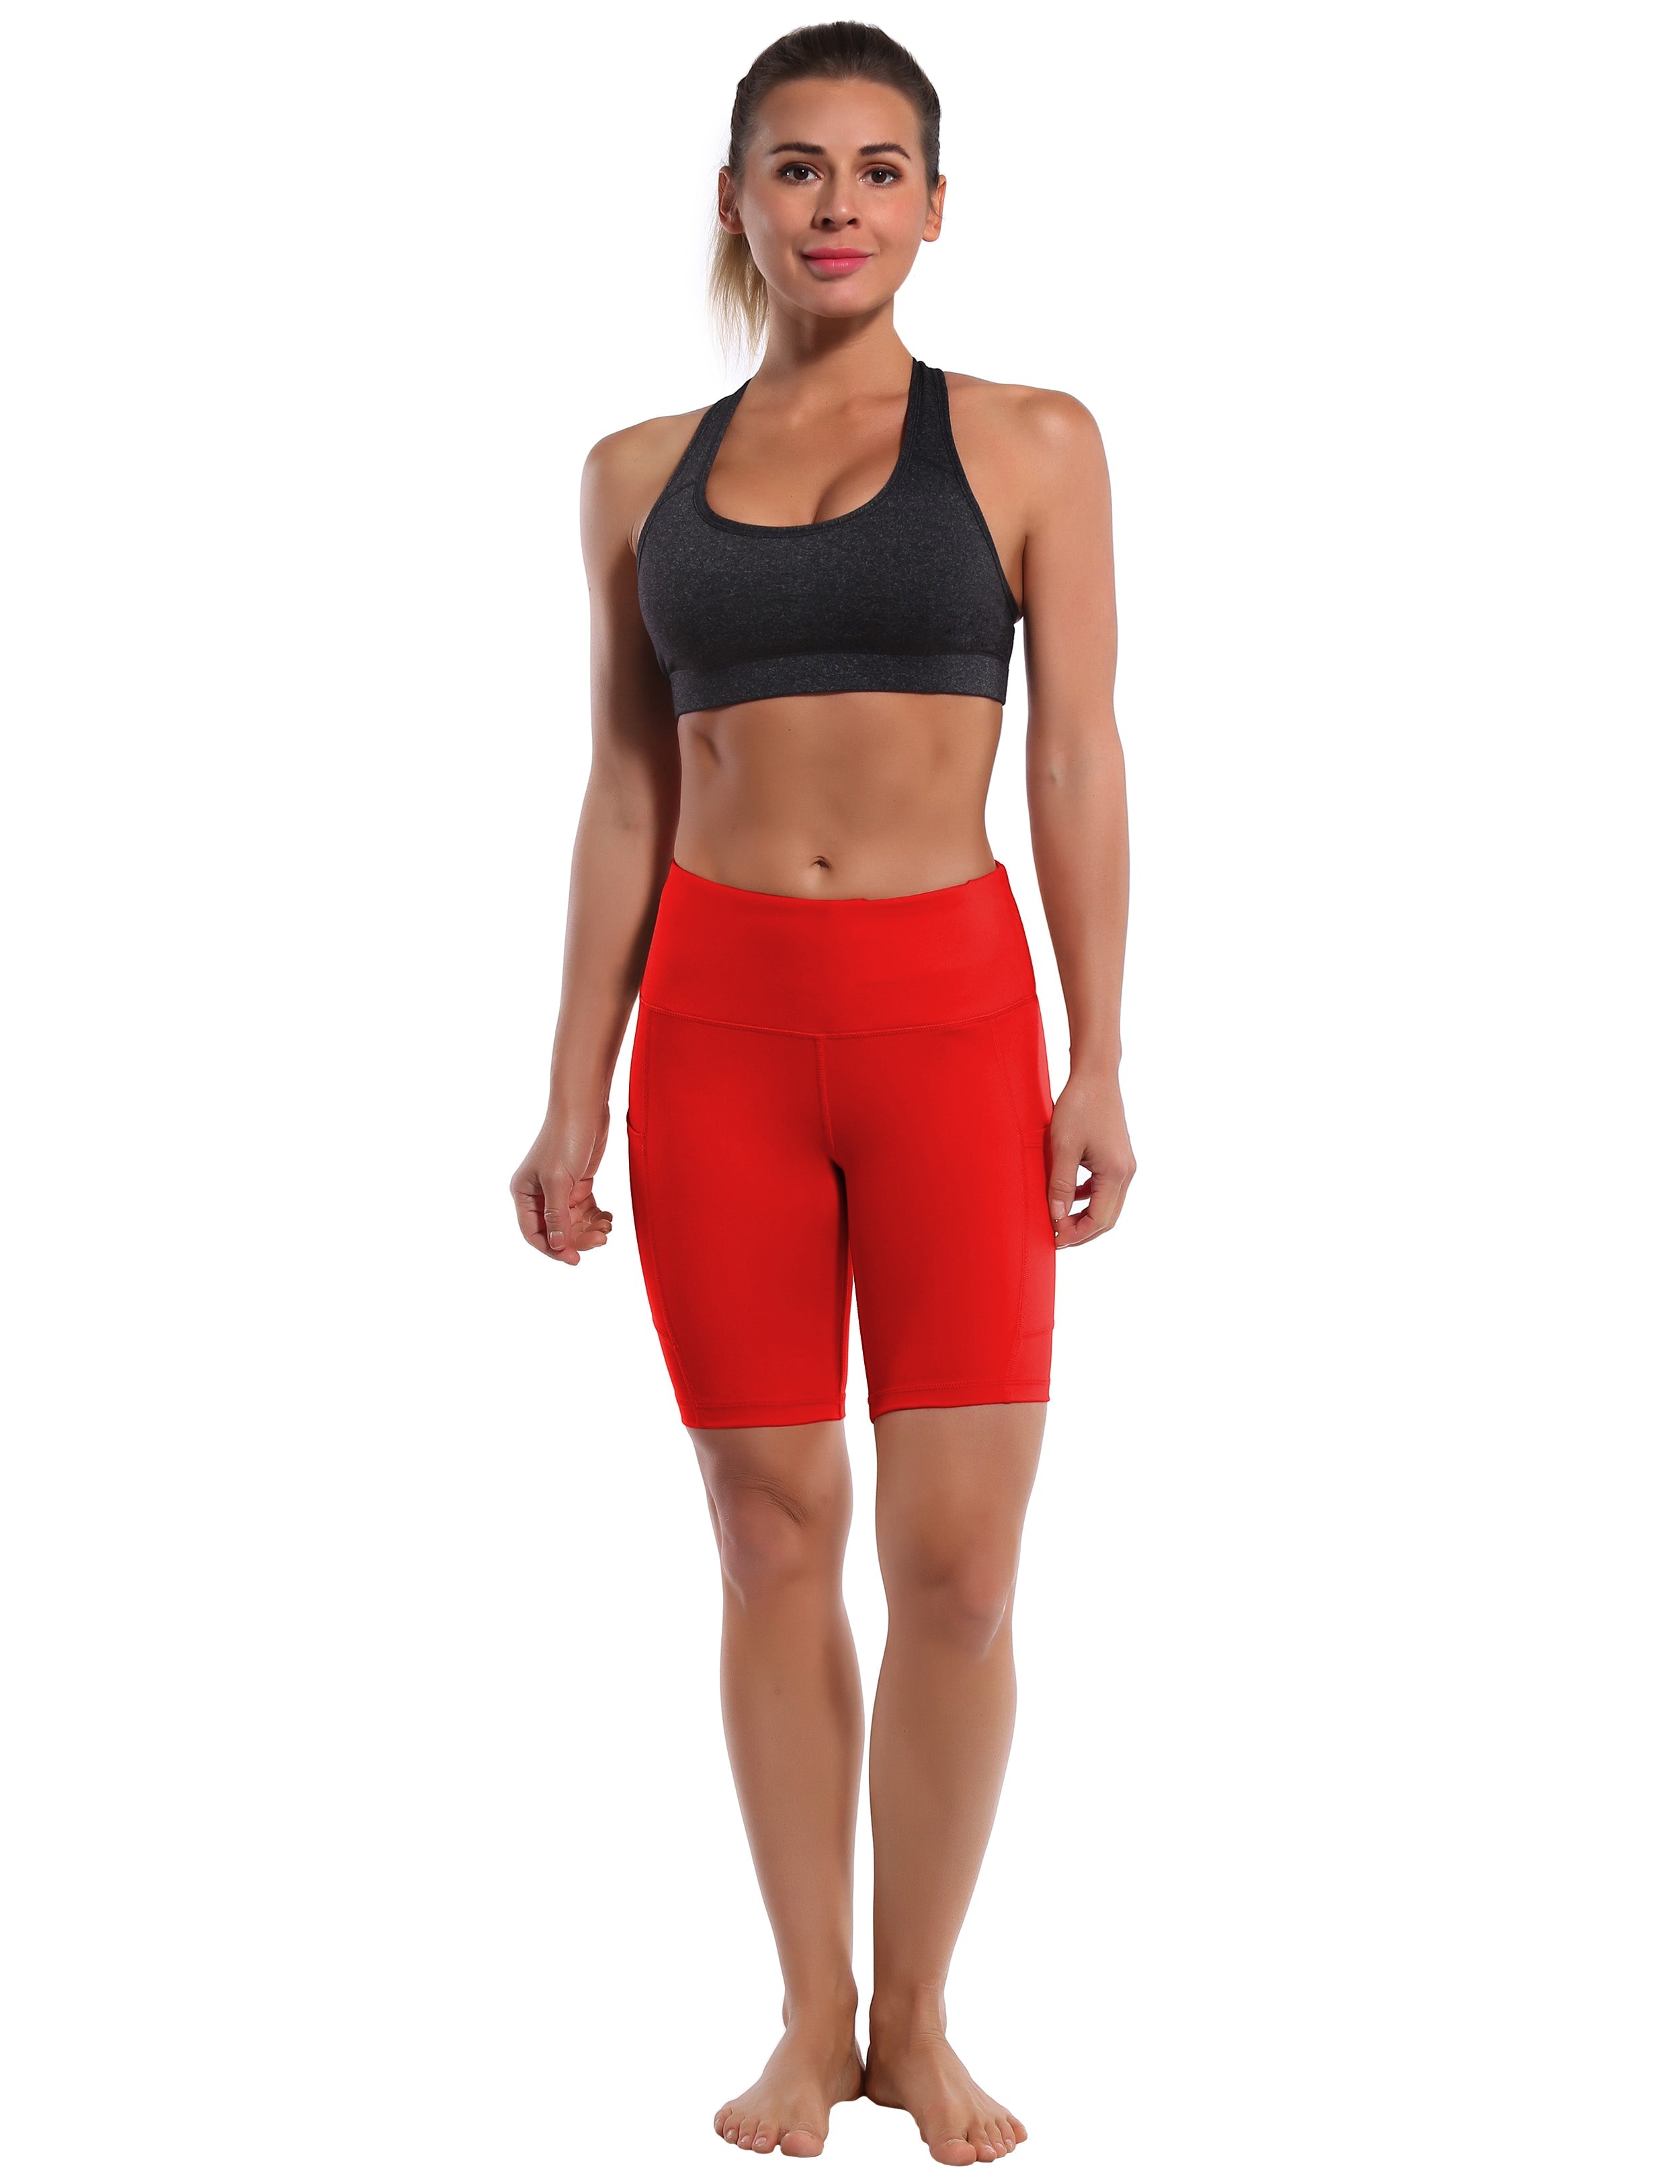 8" Side Pockets yogastudio Shorts scarlet Sleek, soft, smooth and totally comfortable: our newest style is here. Softest-ever fabric High elasticity High density 4-way stretch Fabric doesn't attract lint easily No see-through Moisture-wicking Machine wash 75% Nylon, 25% Spandex